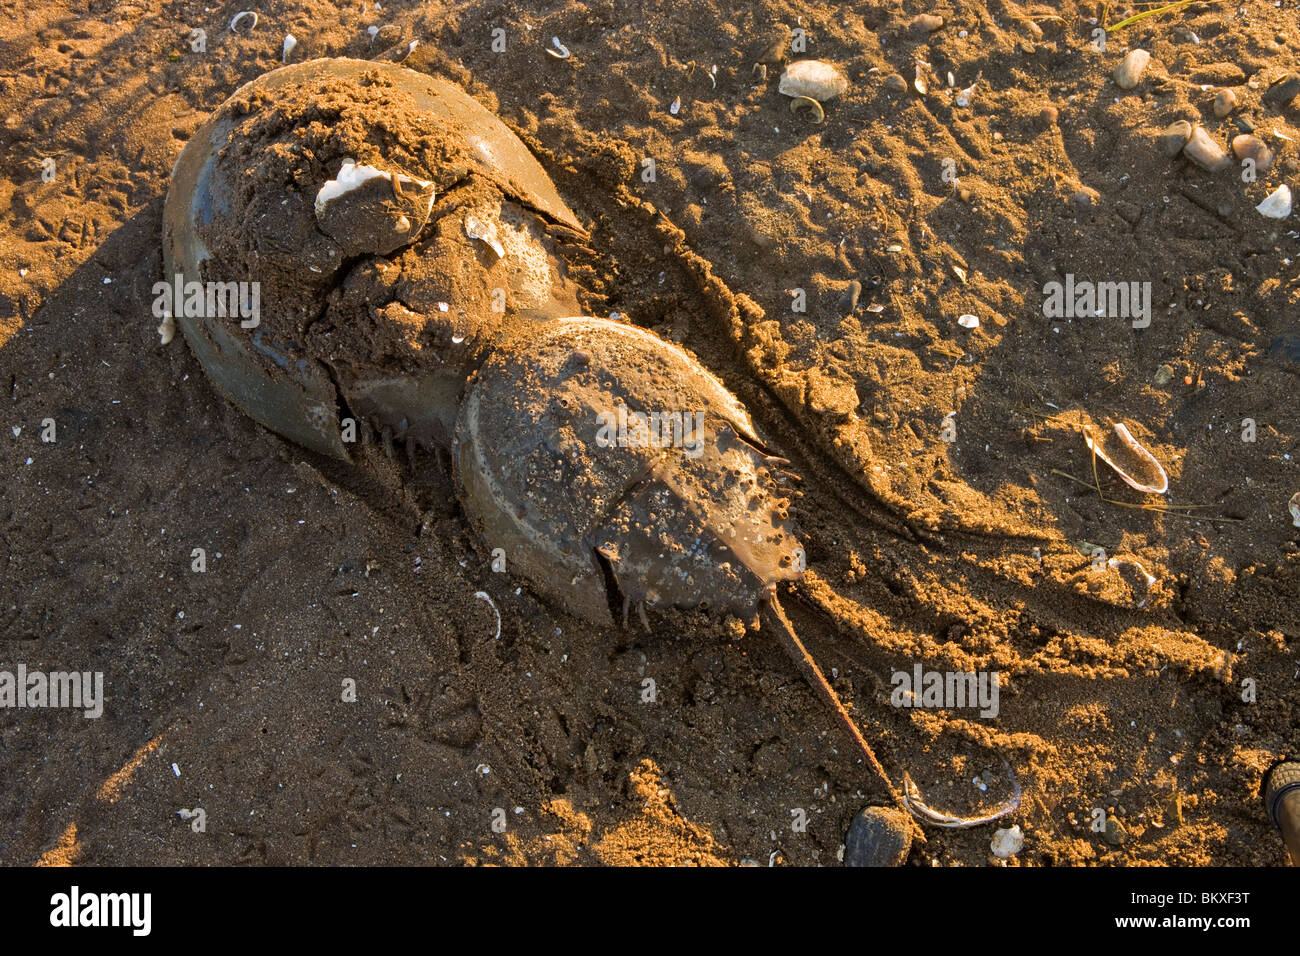 Mating Horseshoe crabs, Limulus polyphemus, at low tide on the salt marsh side of Long Beach in Stratford, Connecticut. Stock Photo